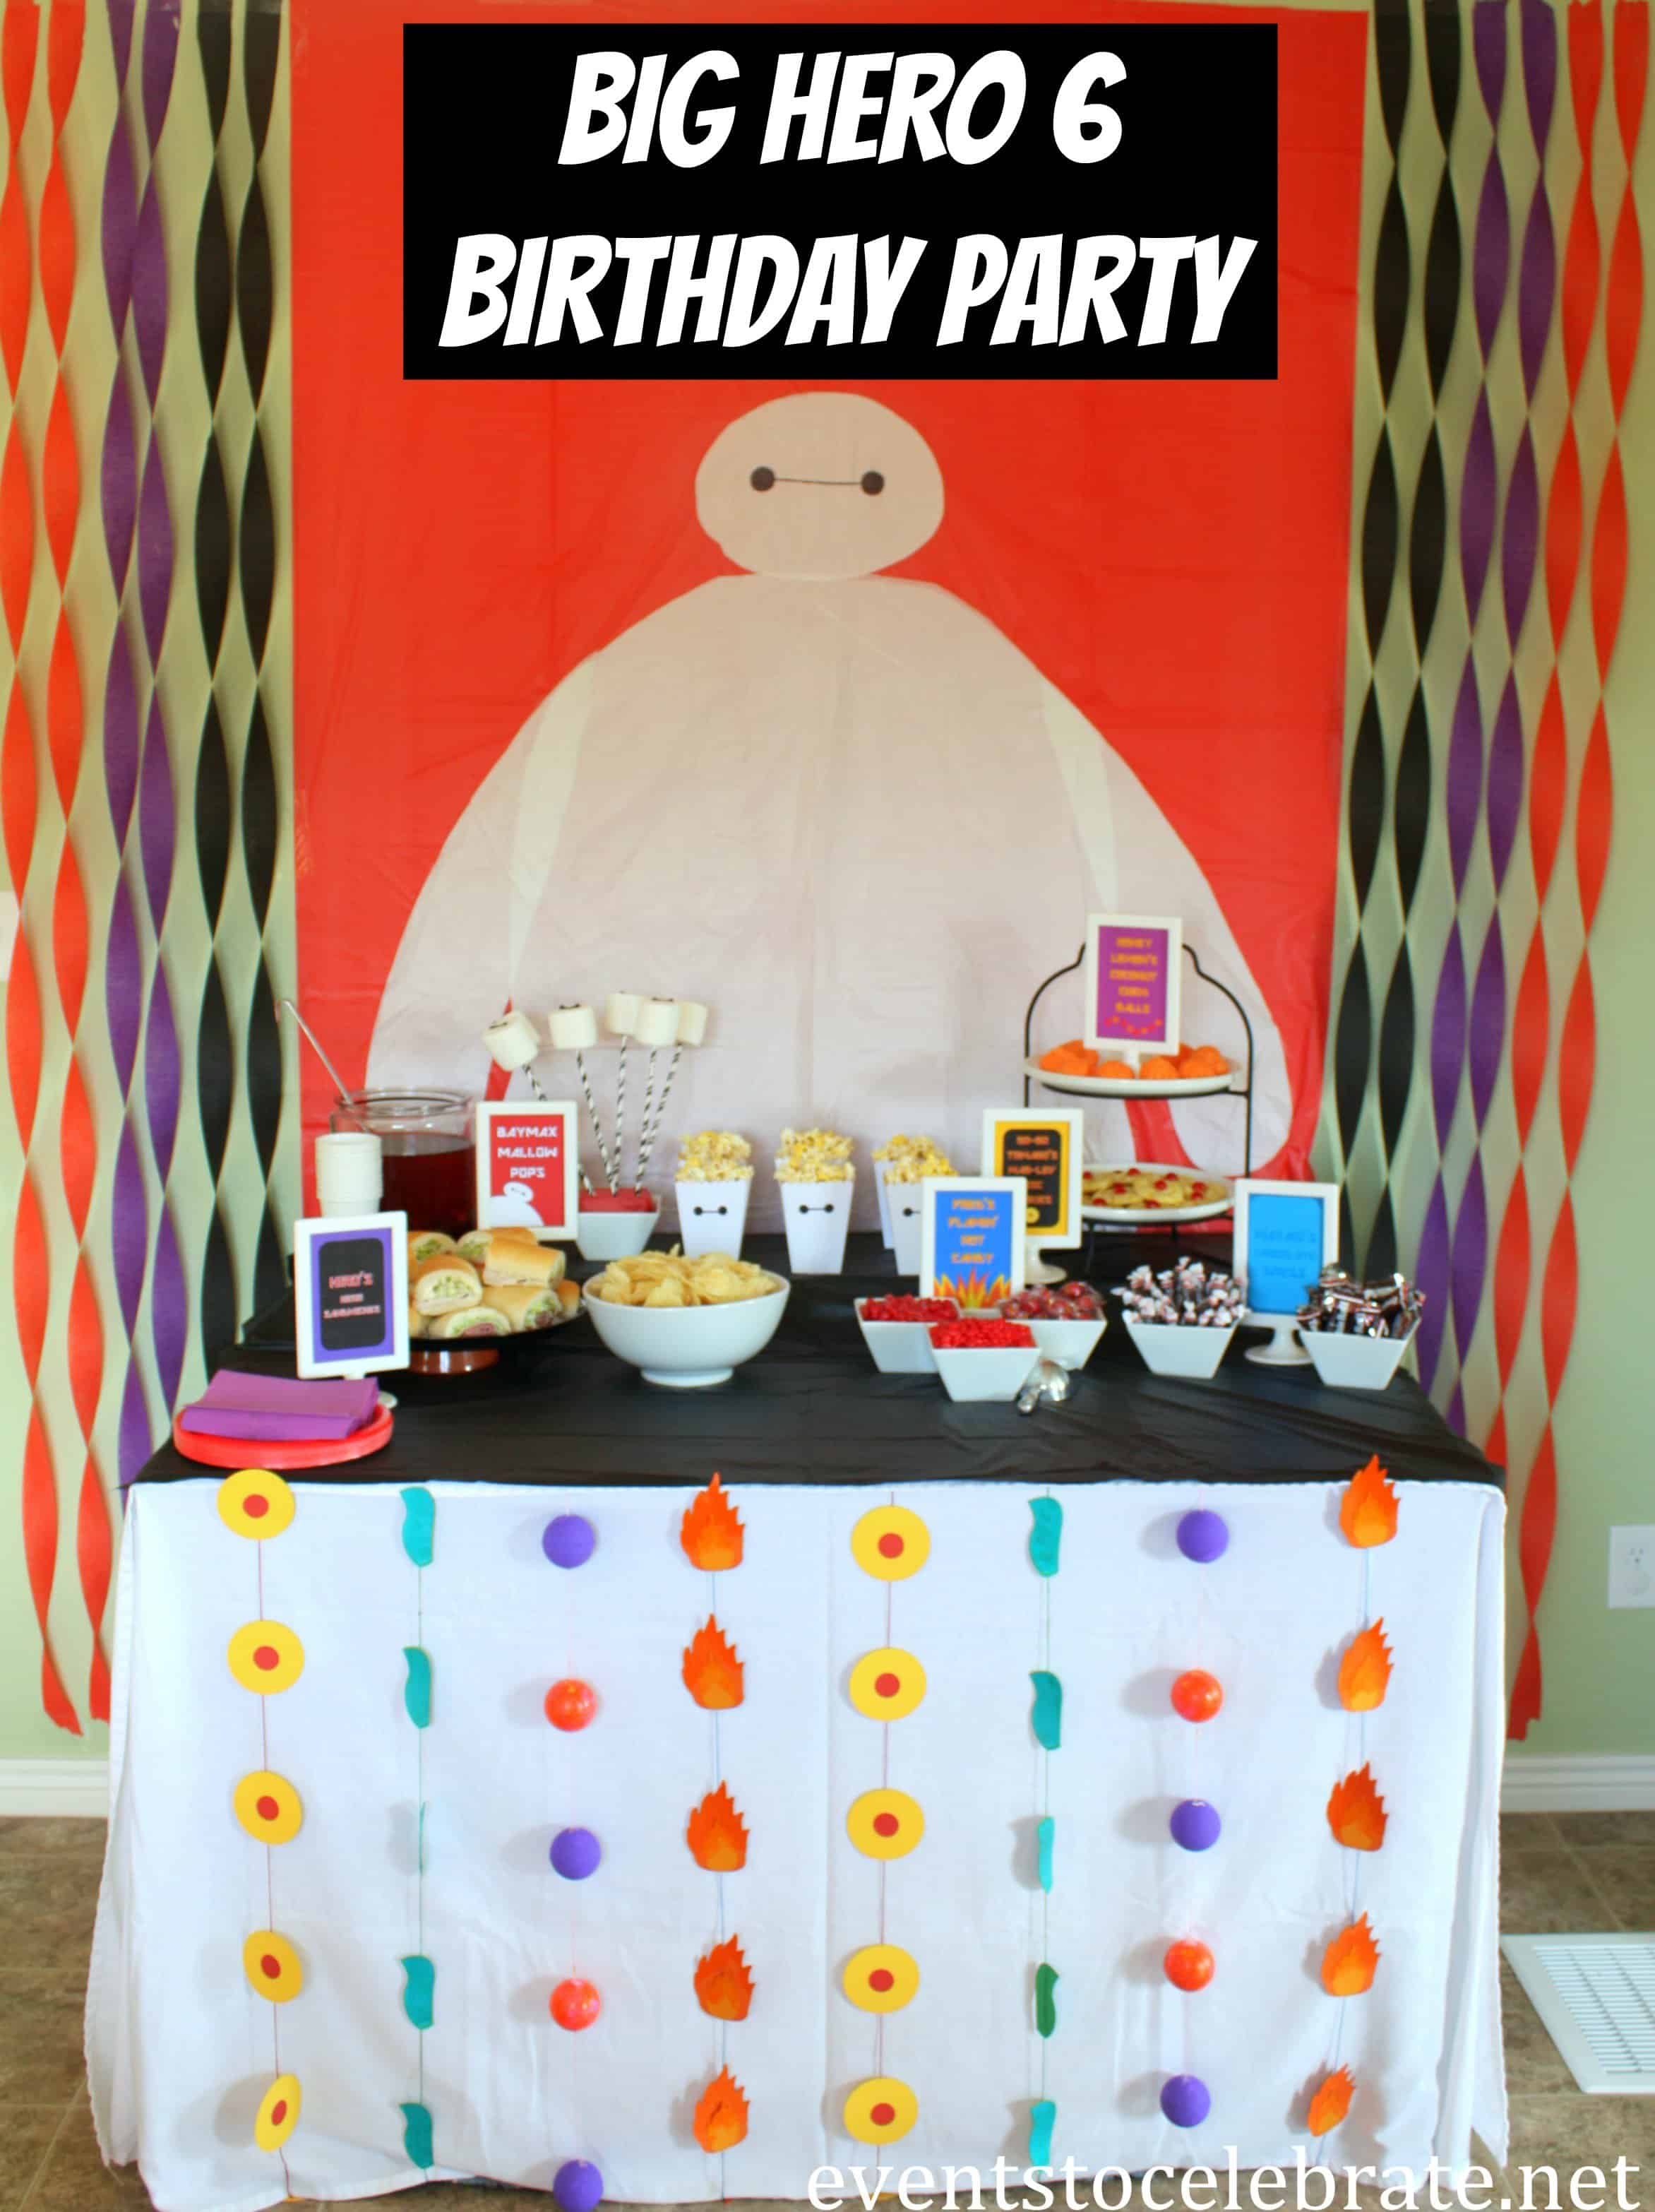 Big Hero 6 Birthday Party - Party Ideas for Real People